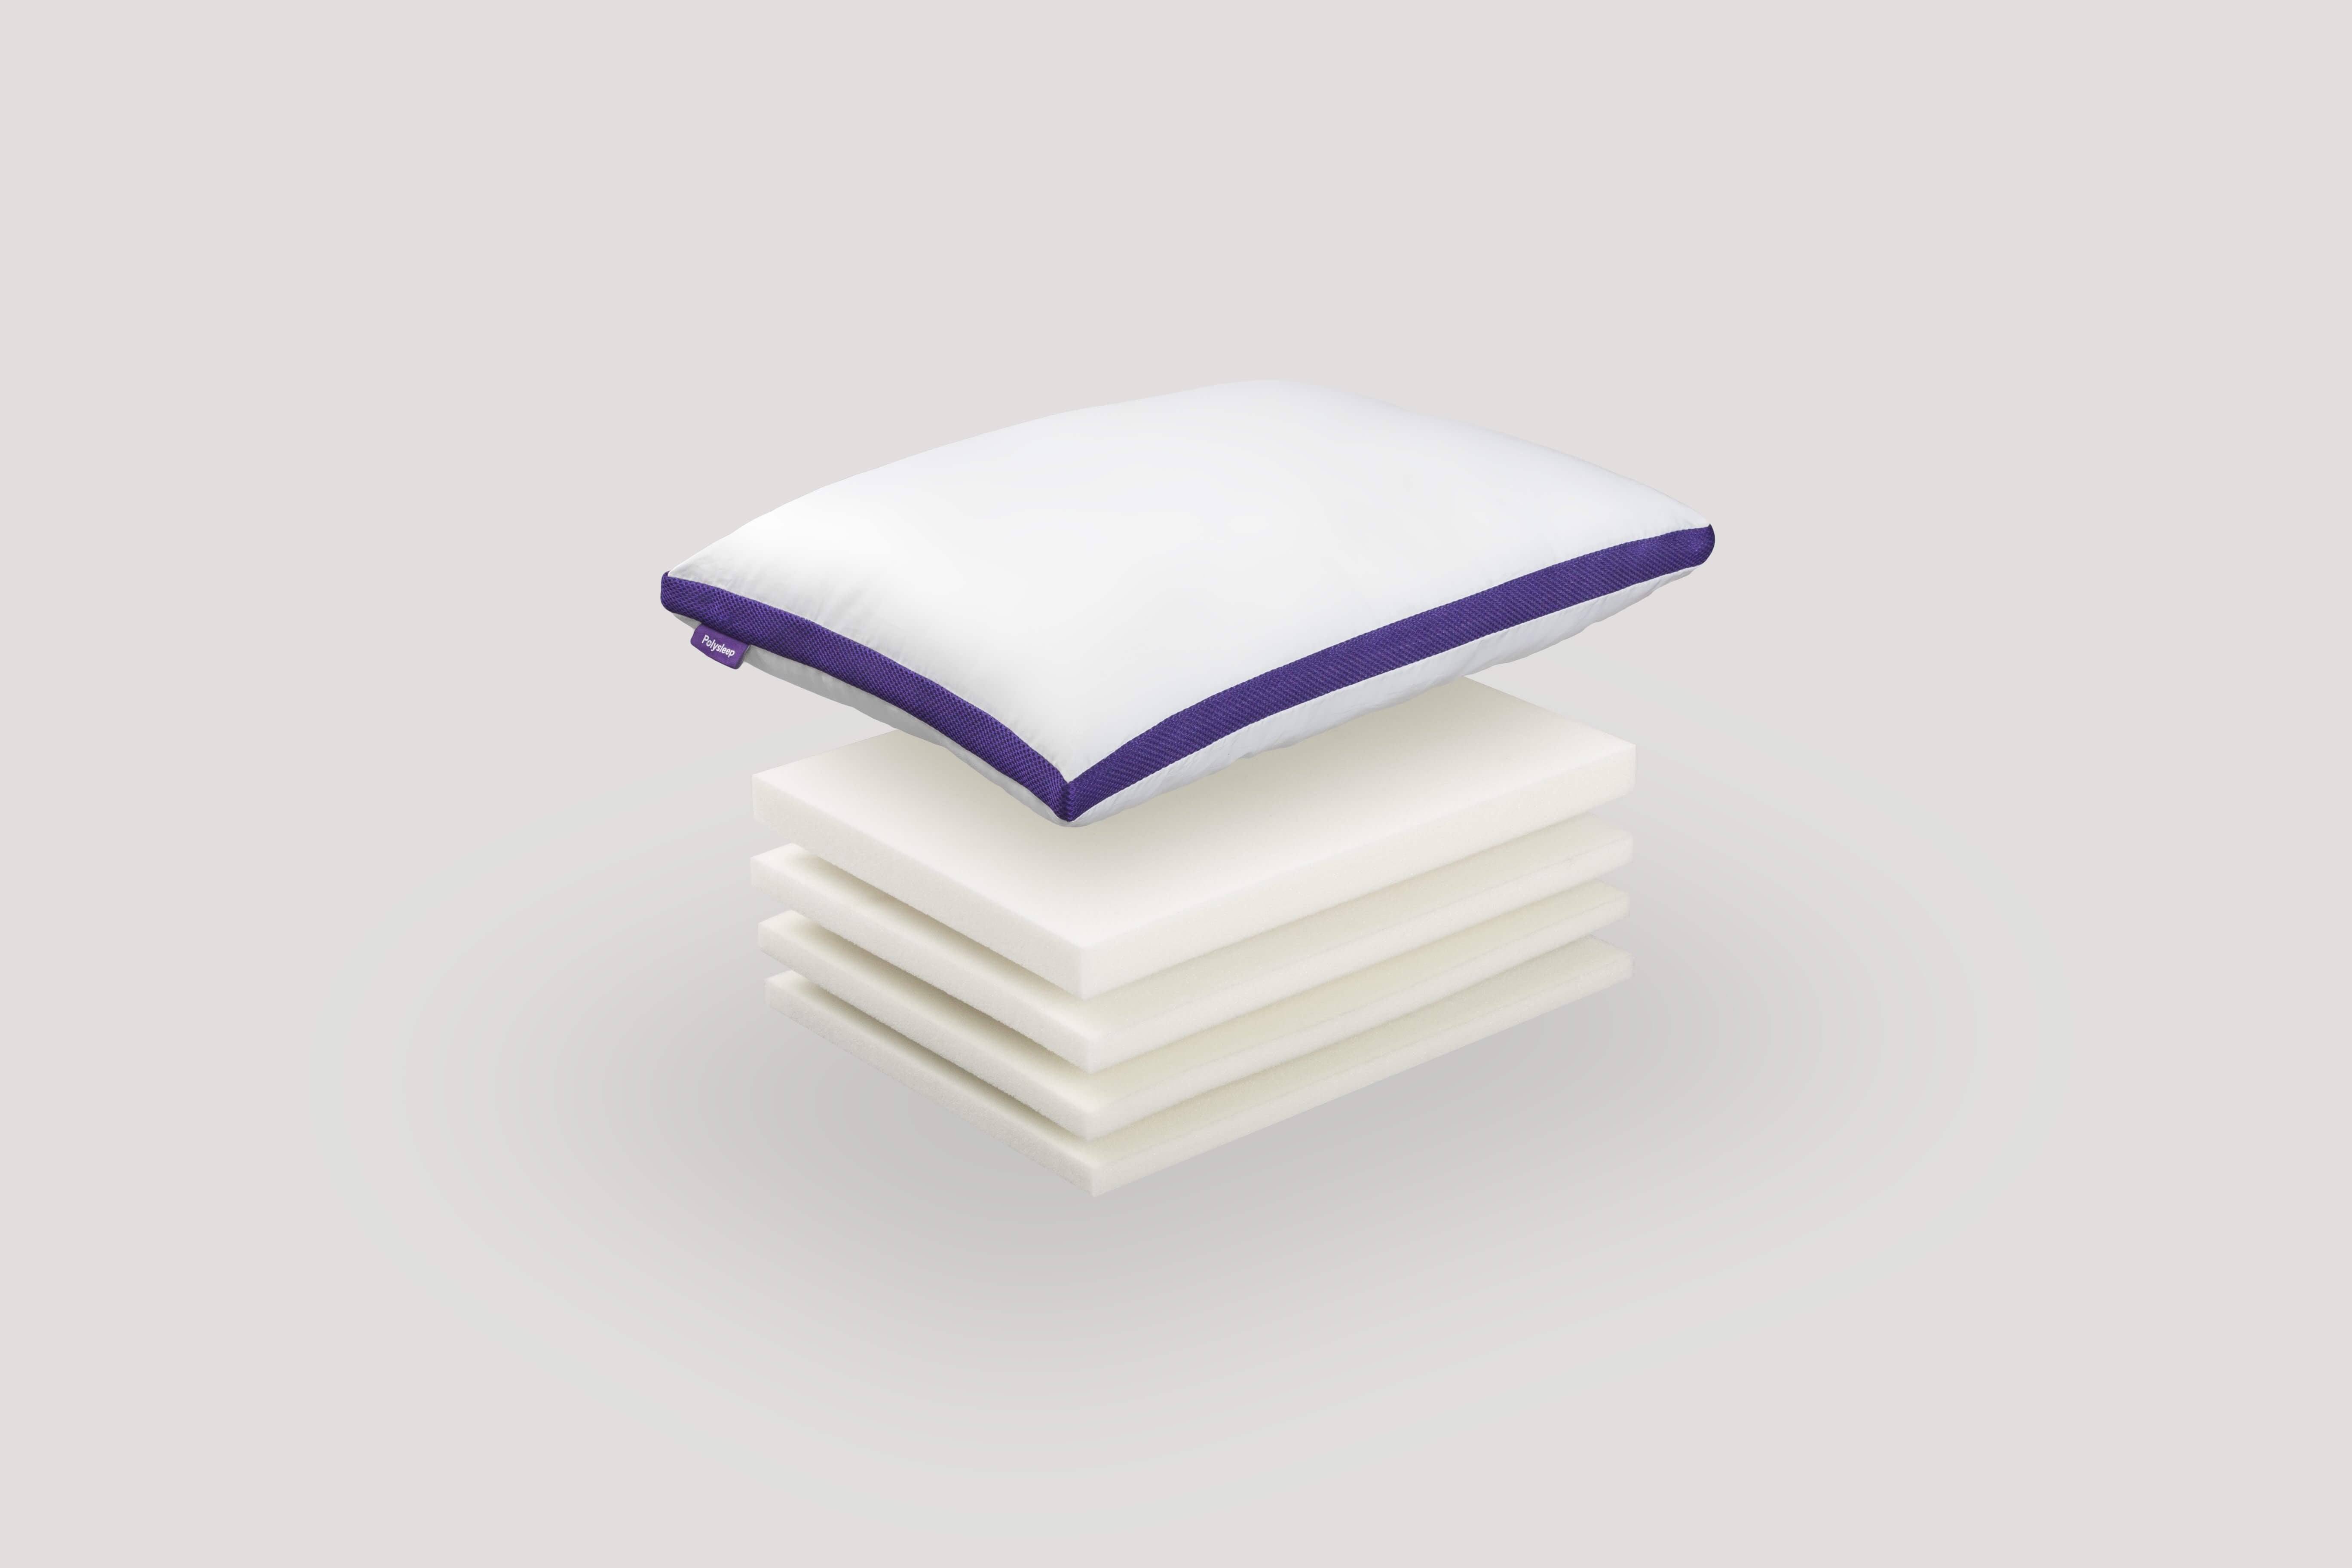 The four foam layers of the Polysleep pillow